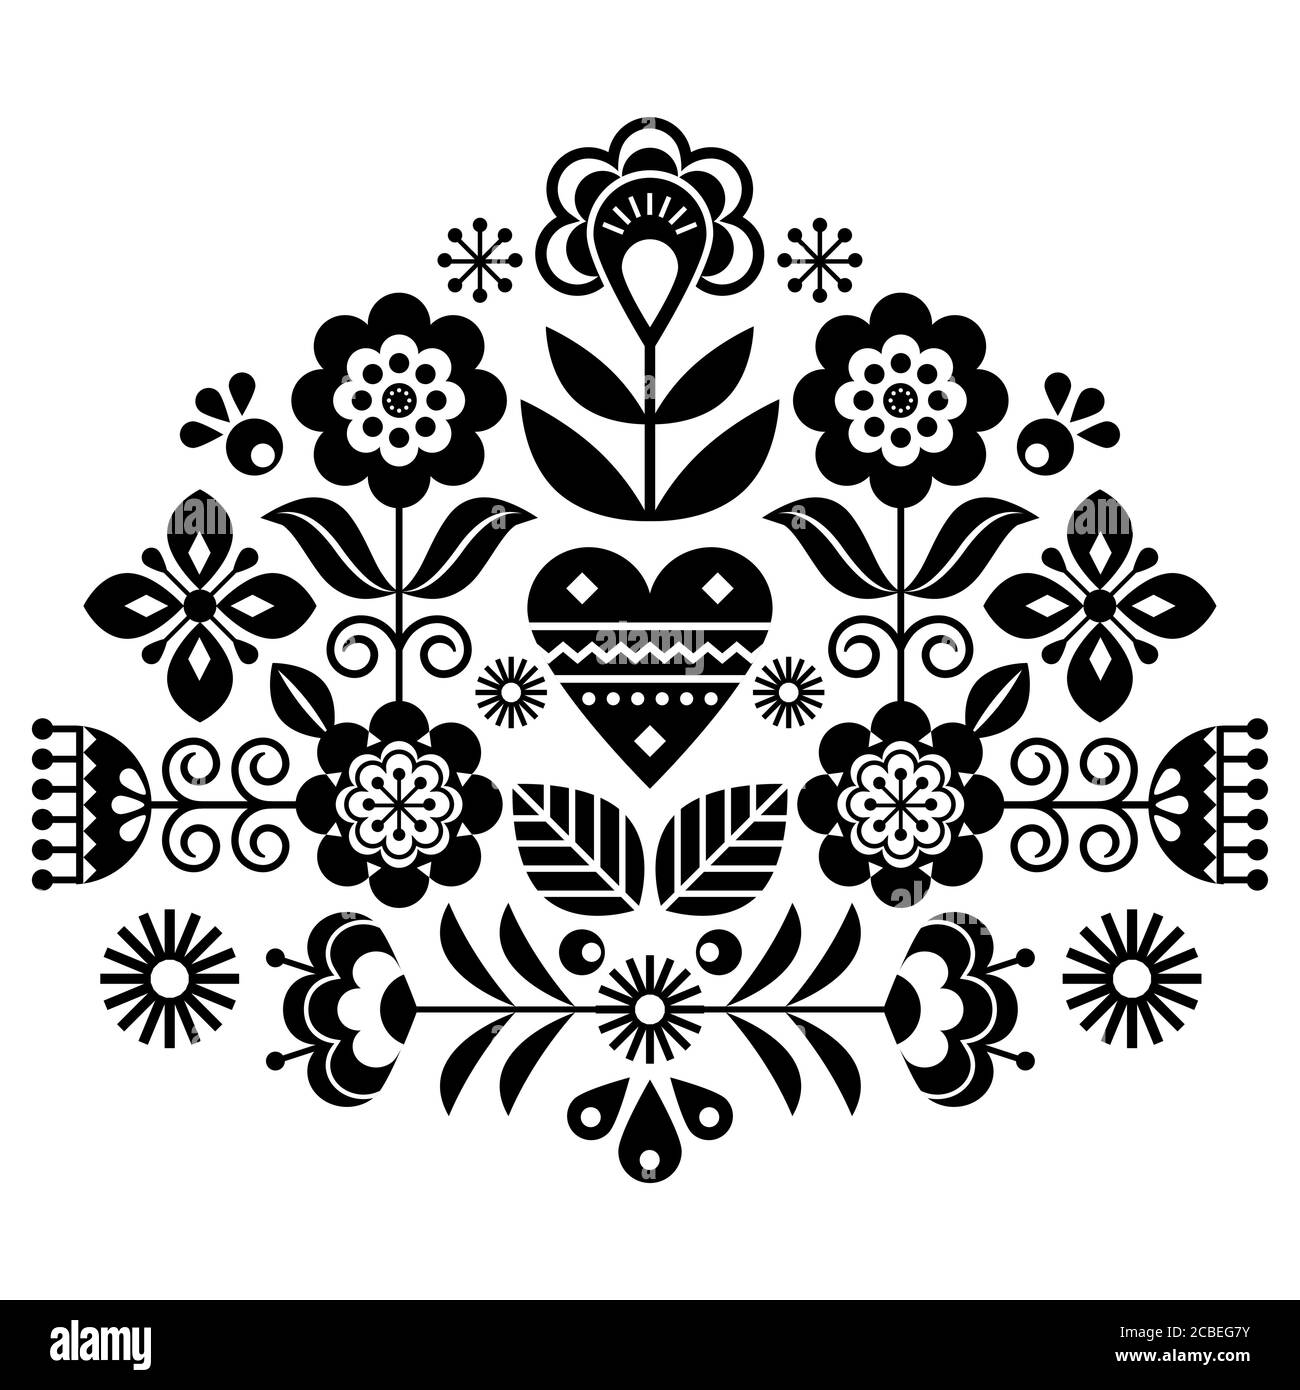 Scandinavian folk flowers vector design, cute spirng floral pattern inspired by traditional embroidery from Sweden, Norway and Denmark Stock Vector